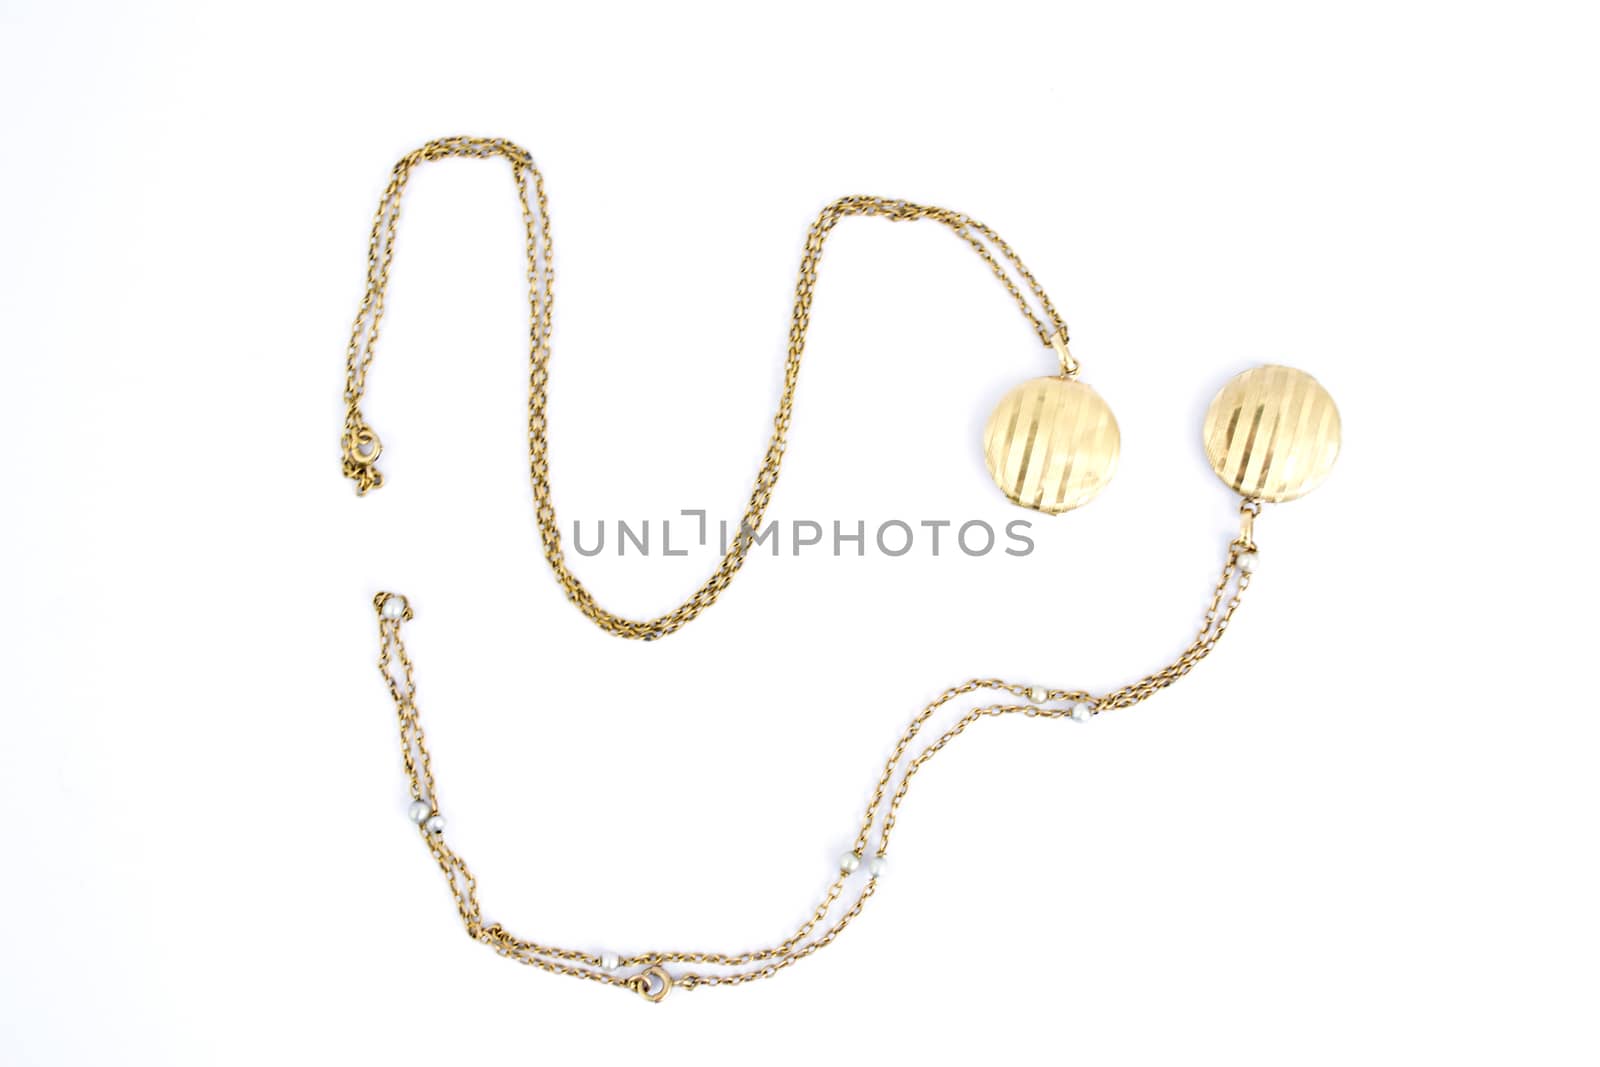 Pair of gold lockets on a white background